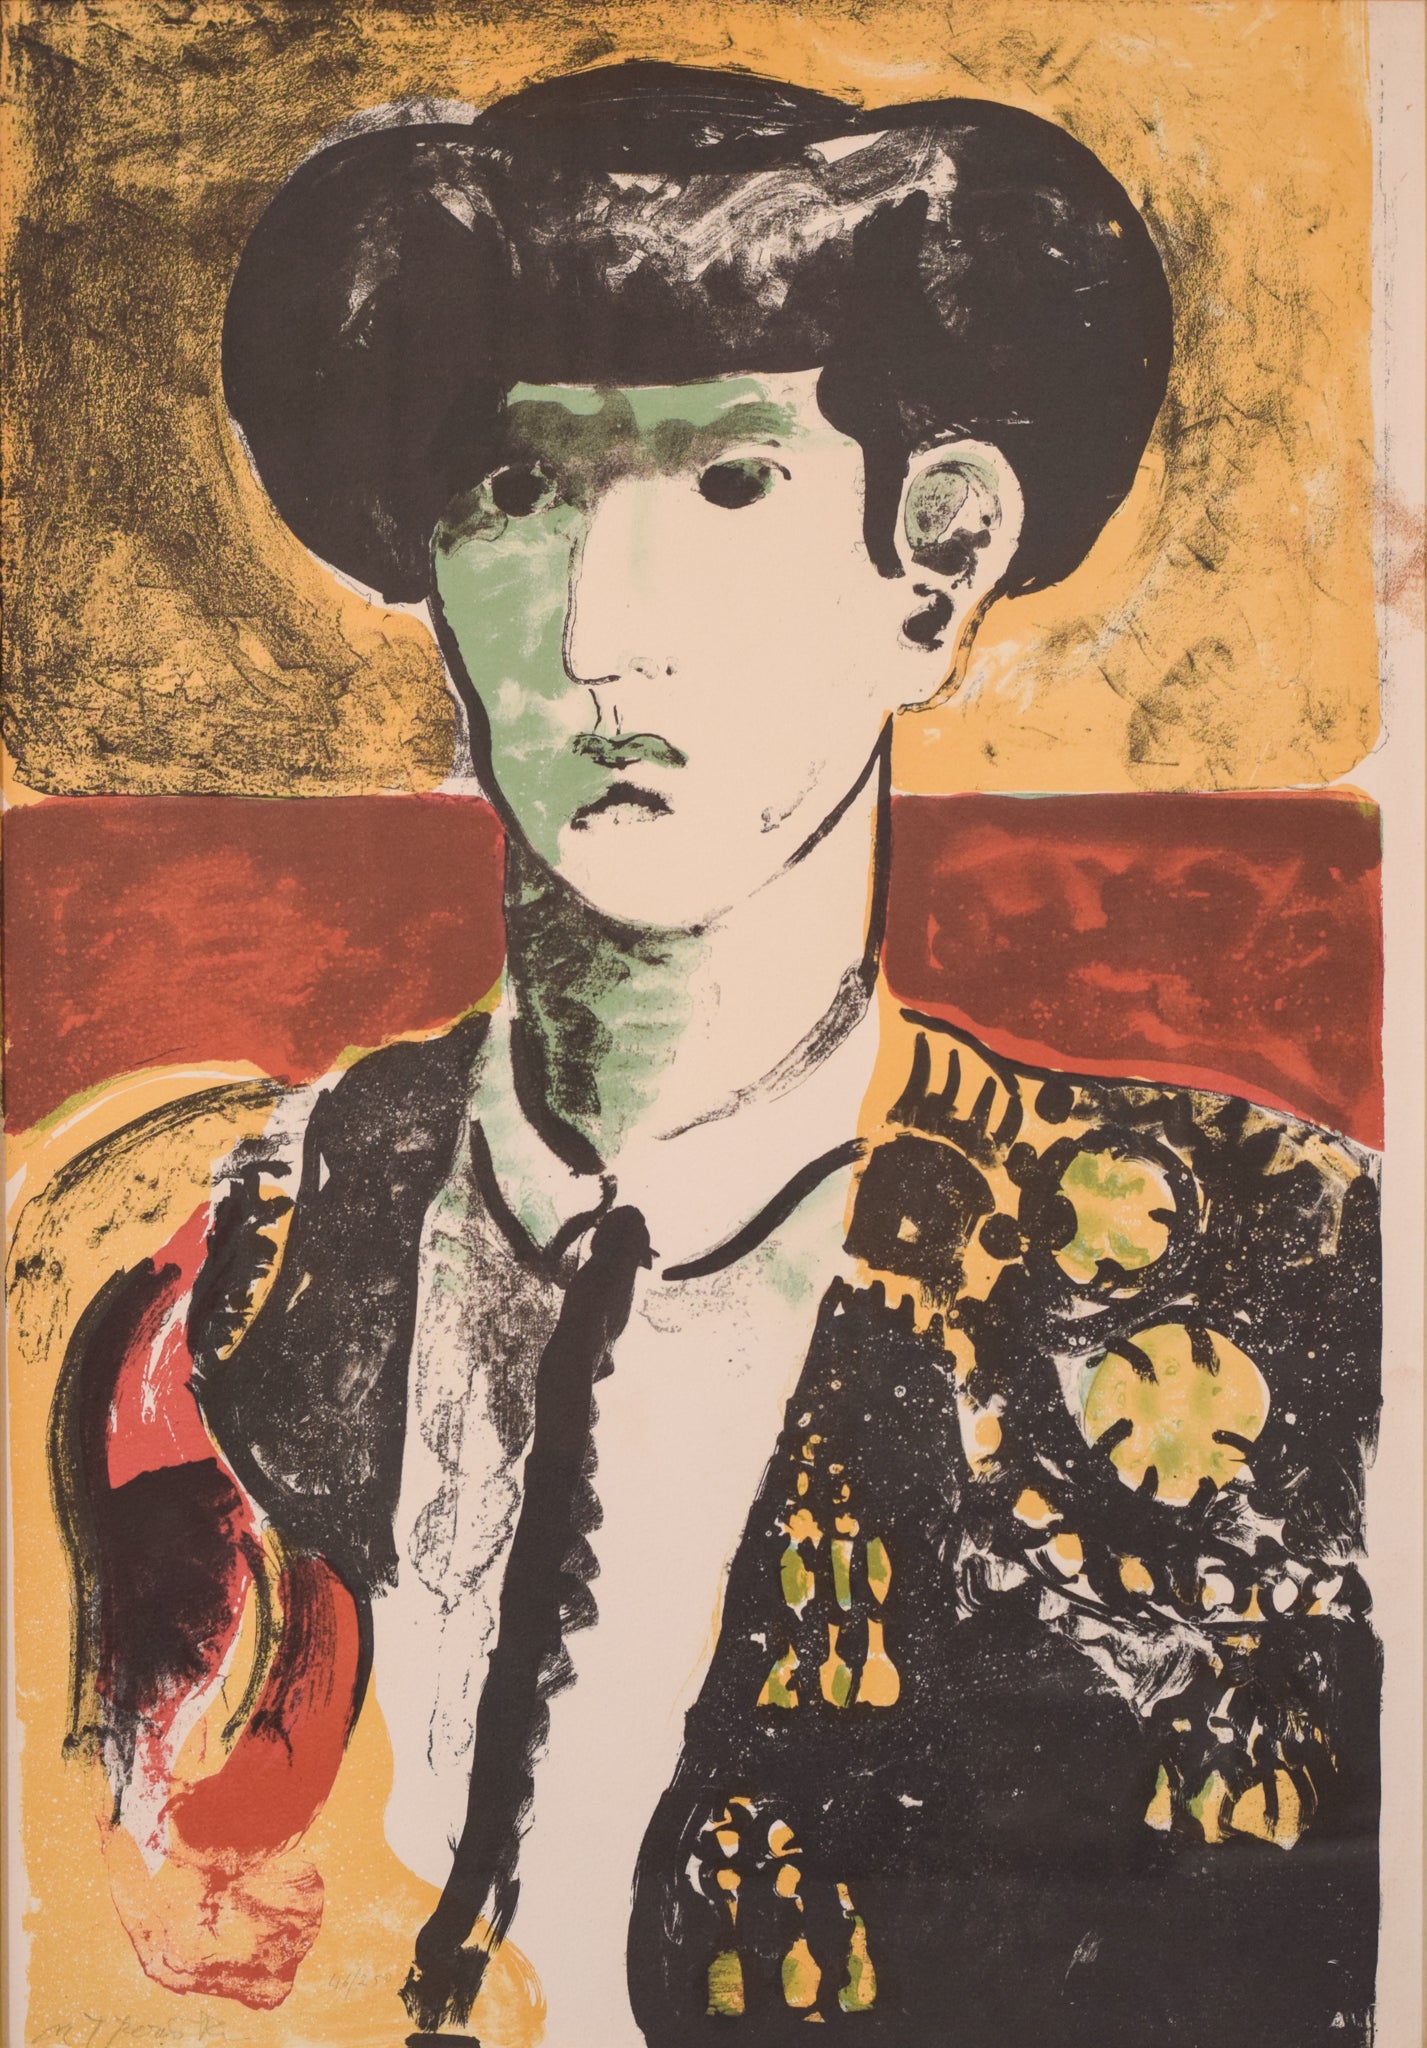 Limited Edition Silkscreen of a Bullfighter - Signed & Numbered